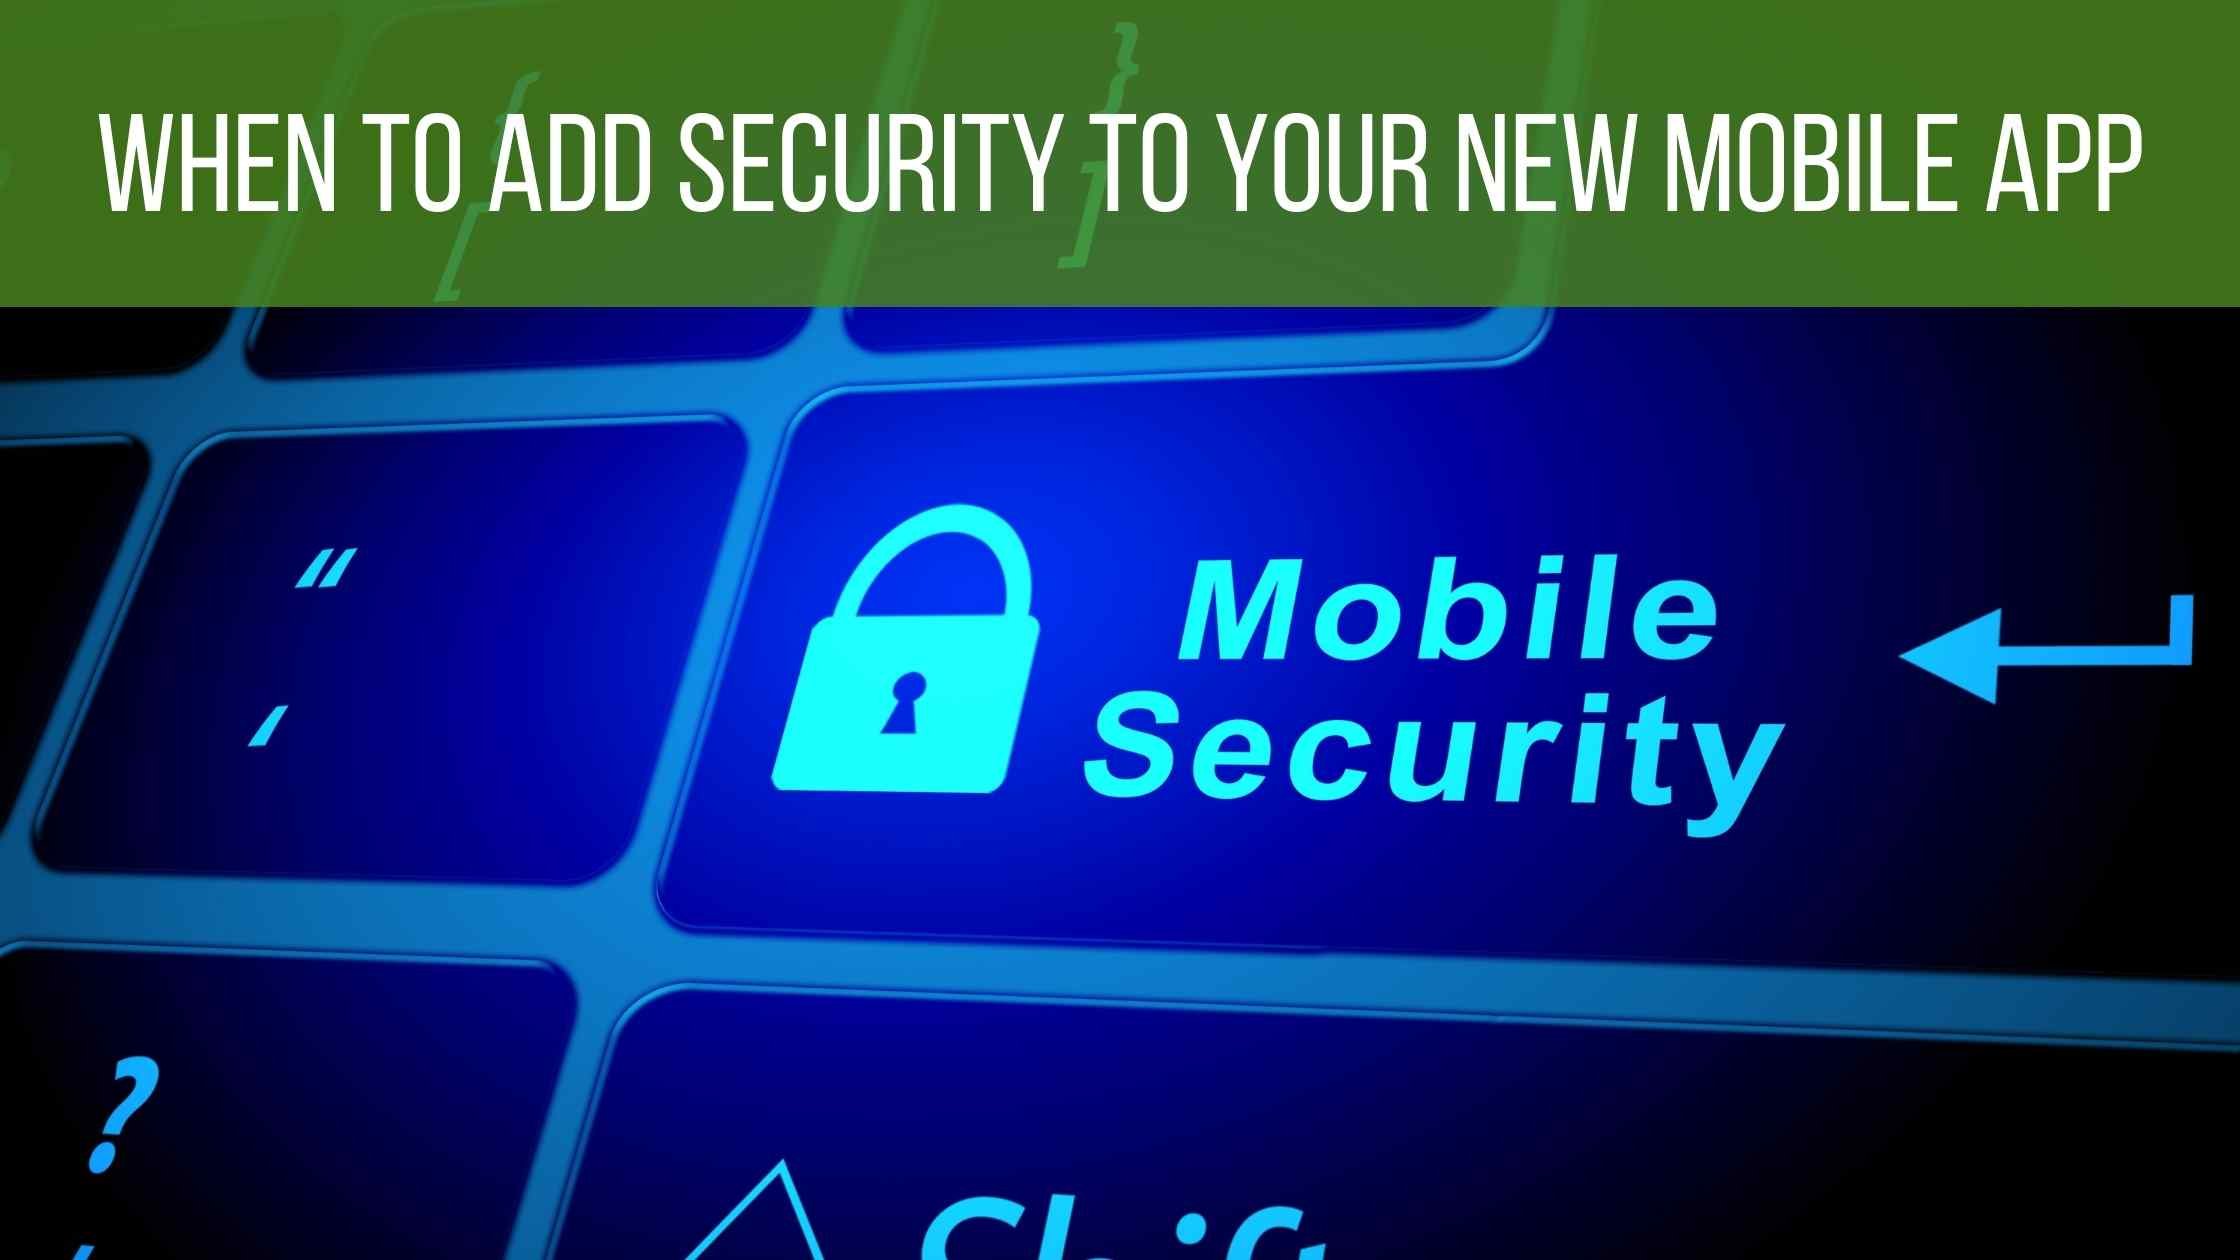 Mobile security concept; Keyboard with mobile security key and banner text 'When To Add Security To Your New Mobile App'